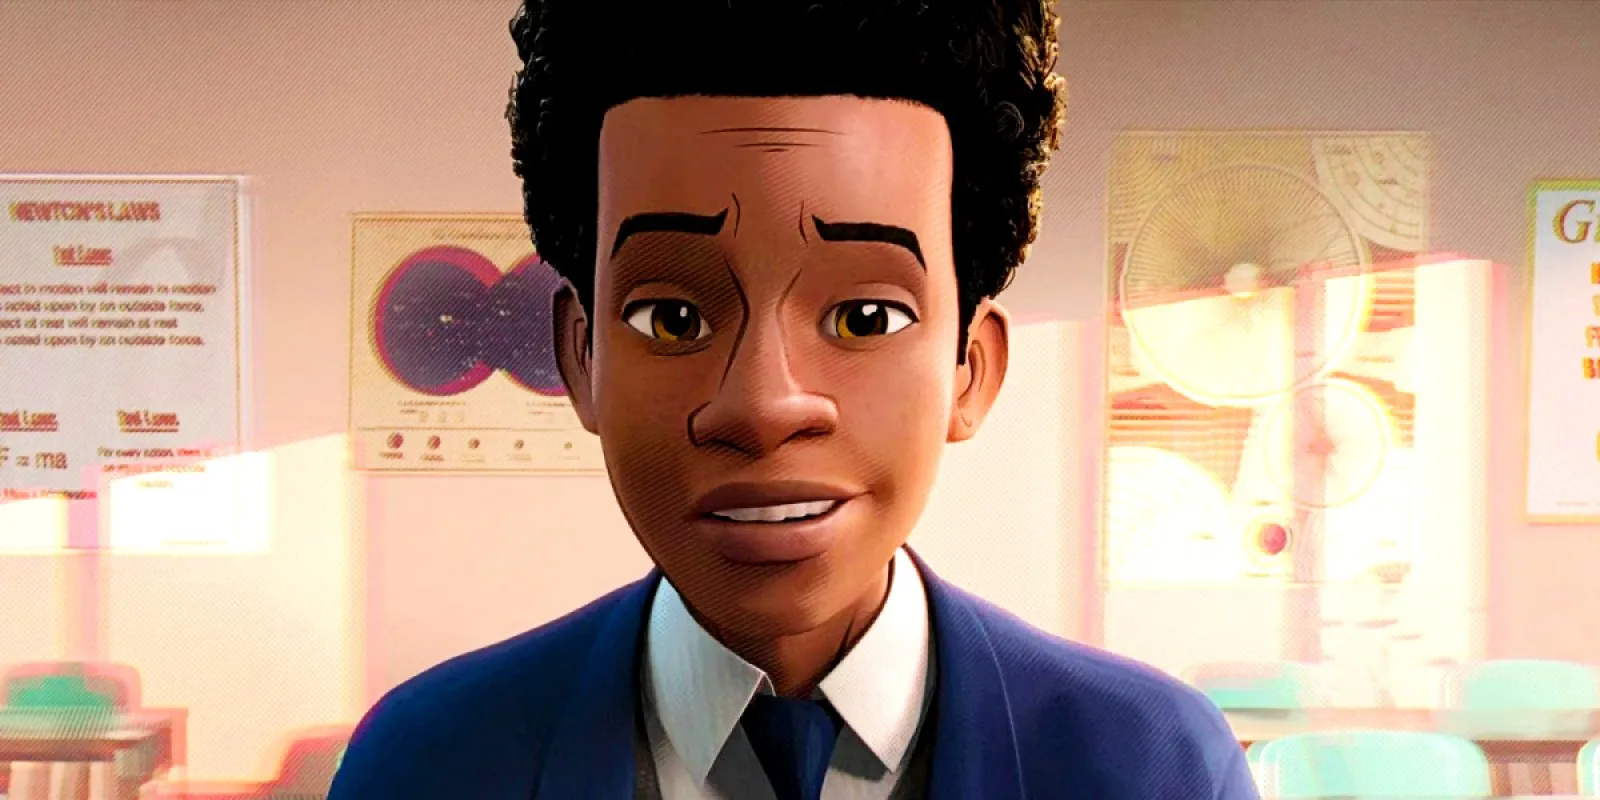 Shameik Moore as Miles Morales in a suit in Spider-Man Into The Spiderverse